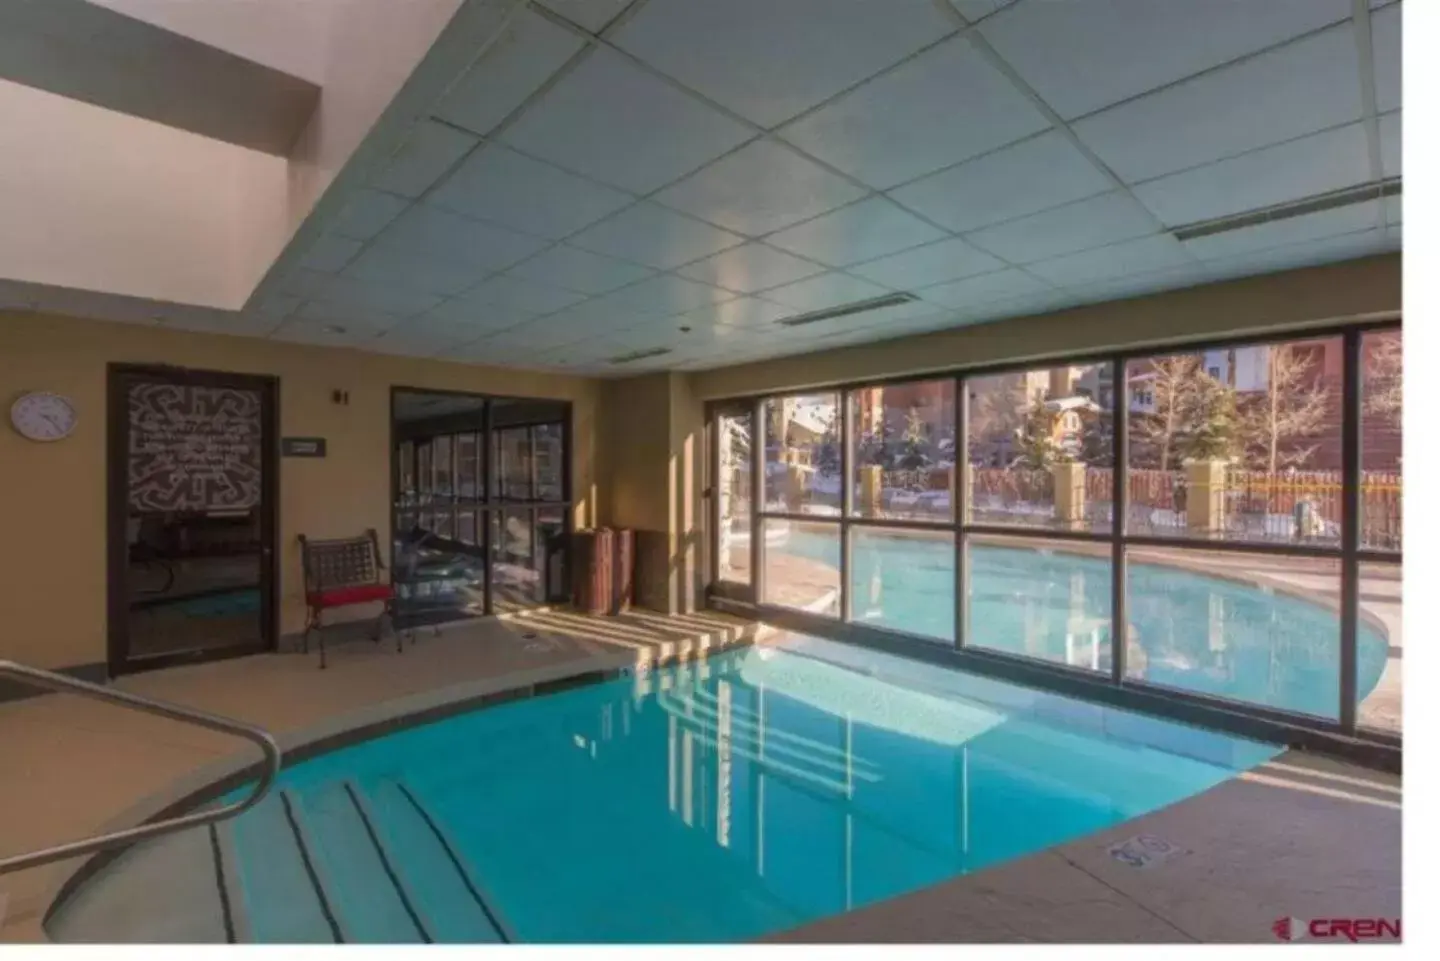 Swimming Pool in Grand Lodge Crested Butte